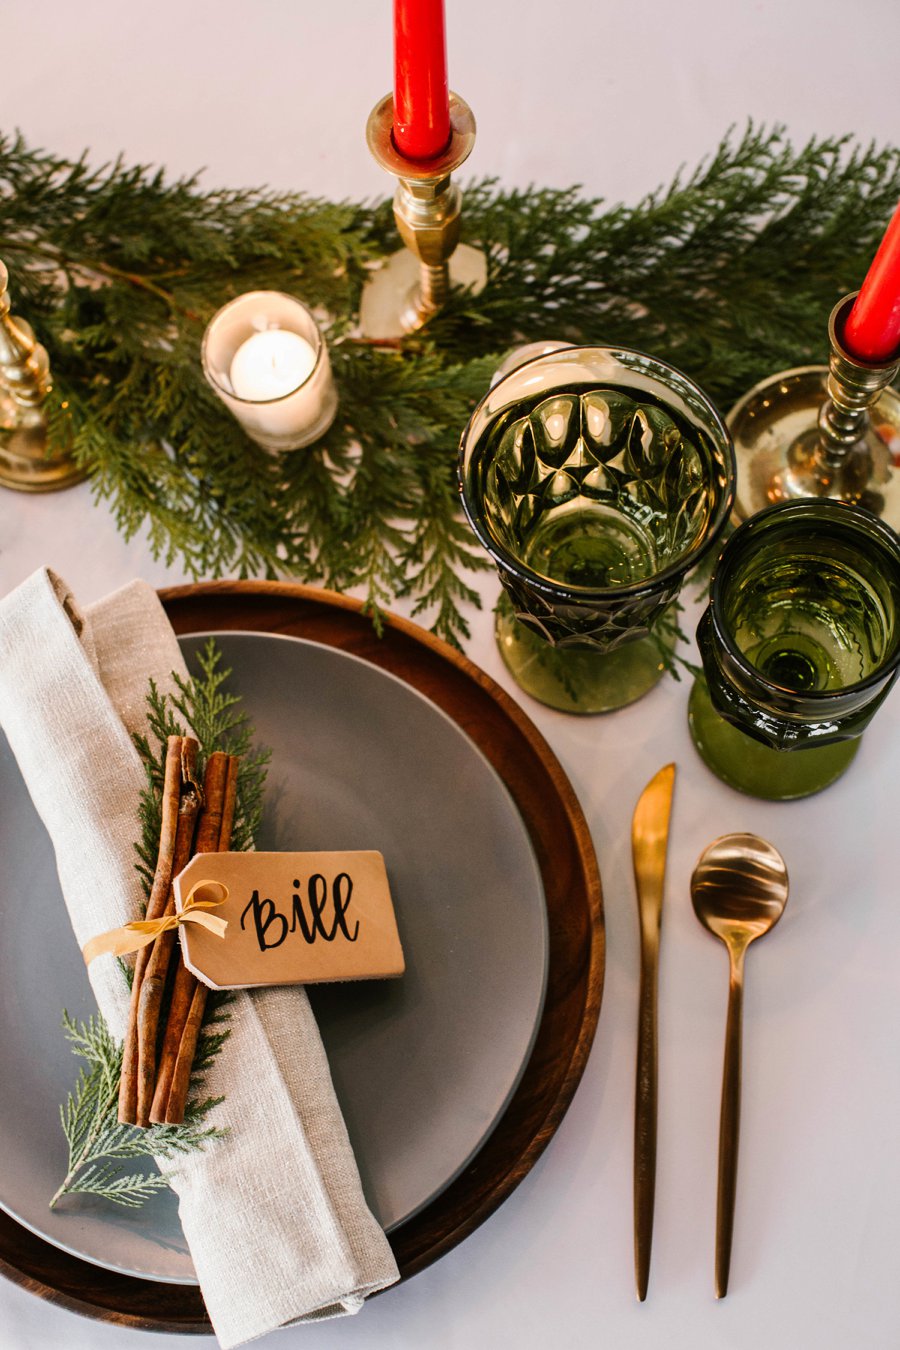 12 Days of Christmas Tabletops: 11 Pipers Piping via TheELD.com